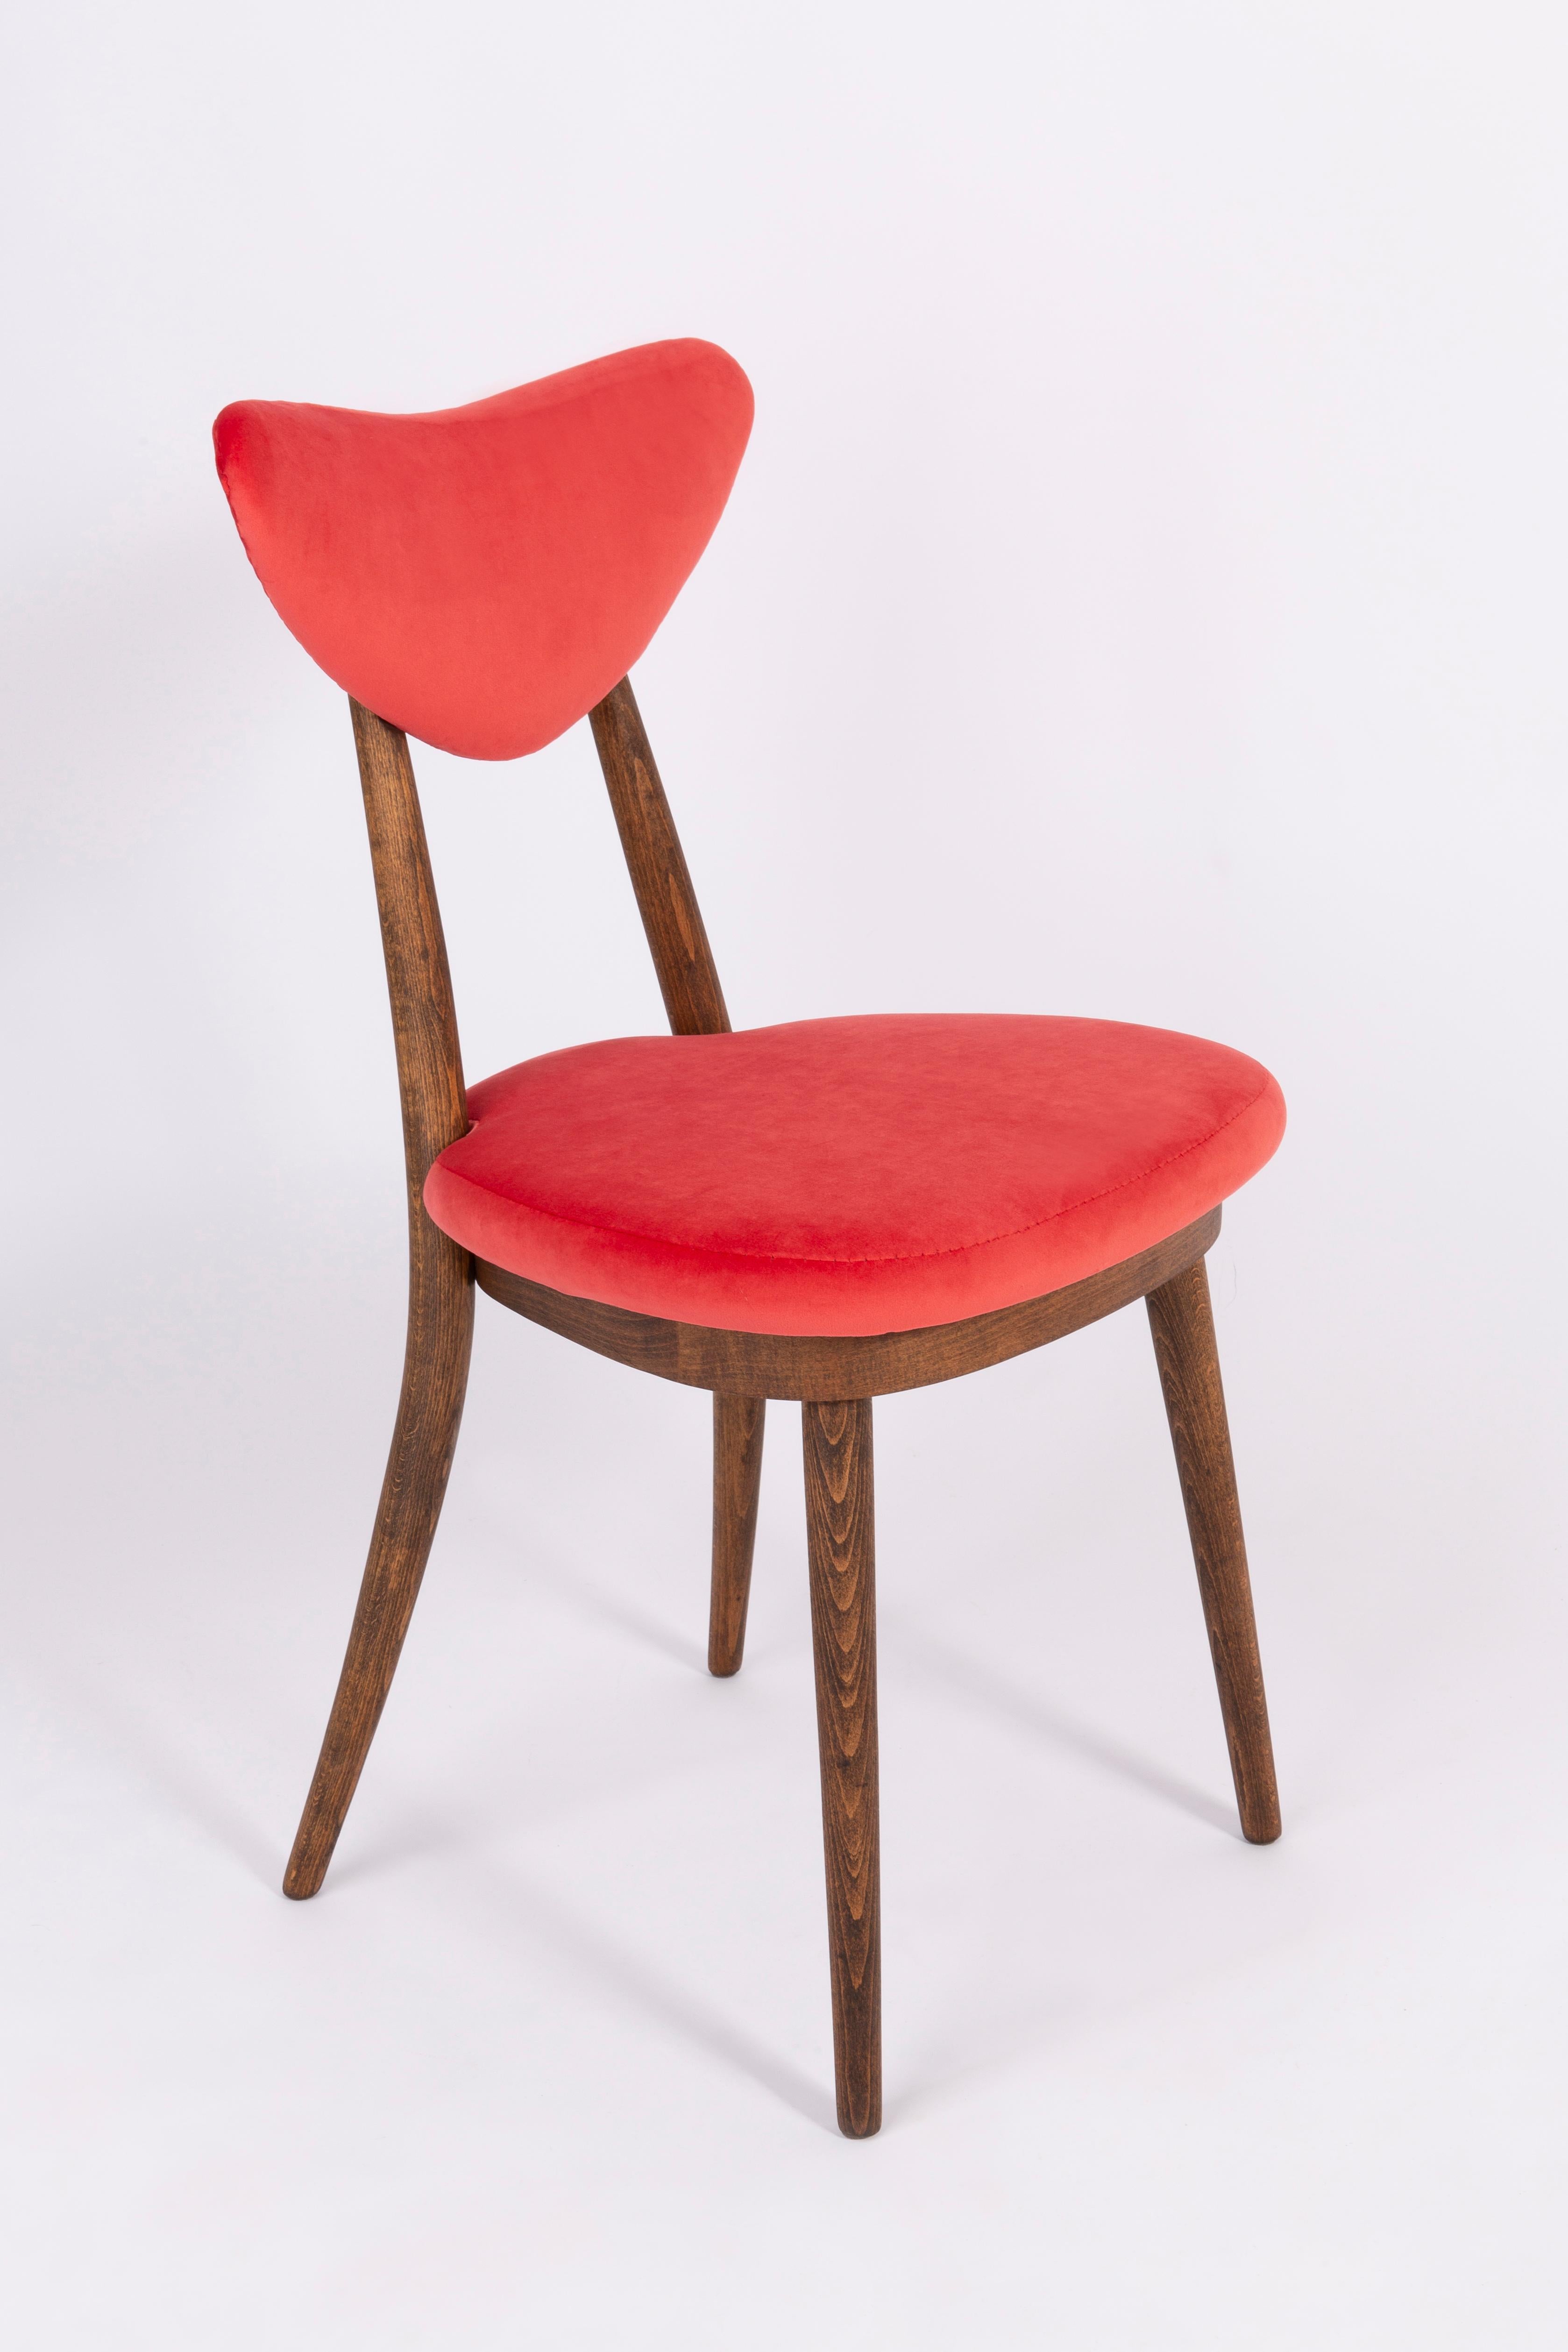 Set of Eight Red Heart Chairs, Poland, 1960s For Sale 5